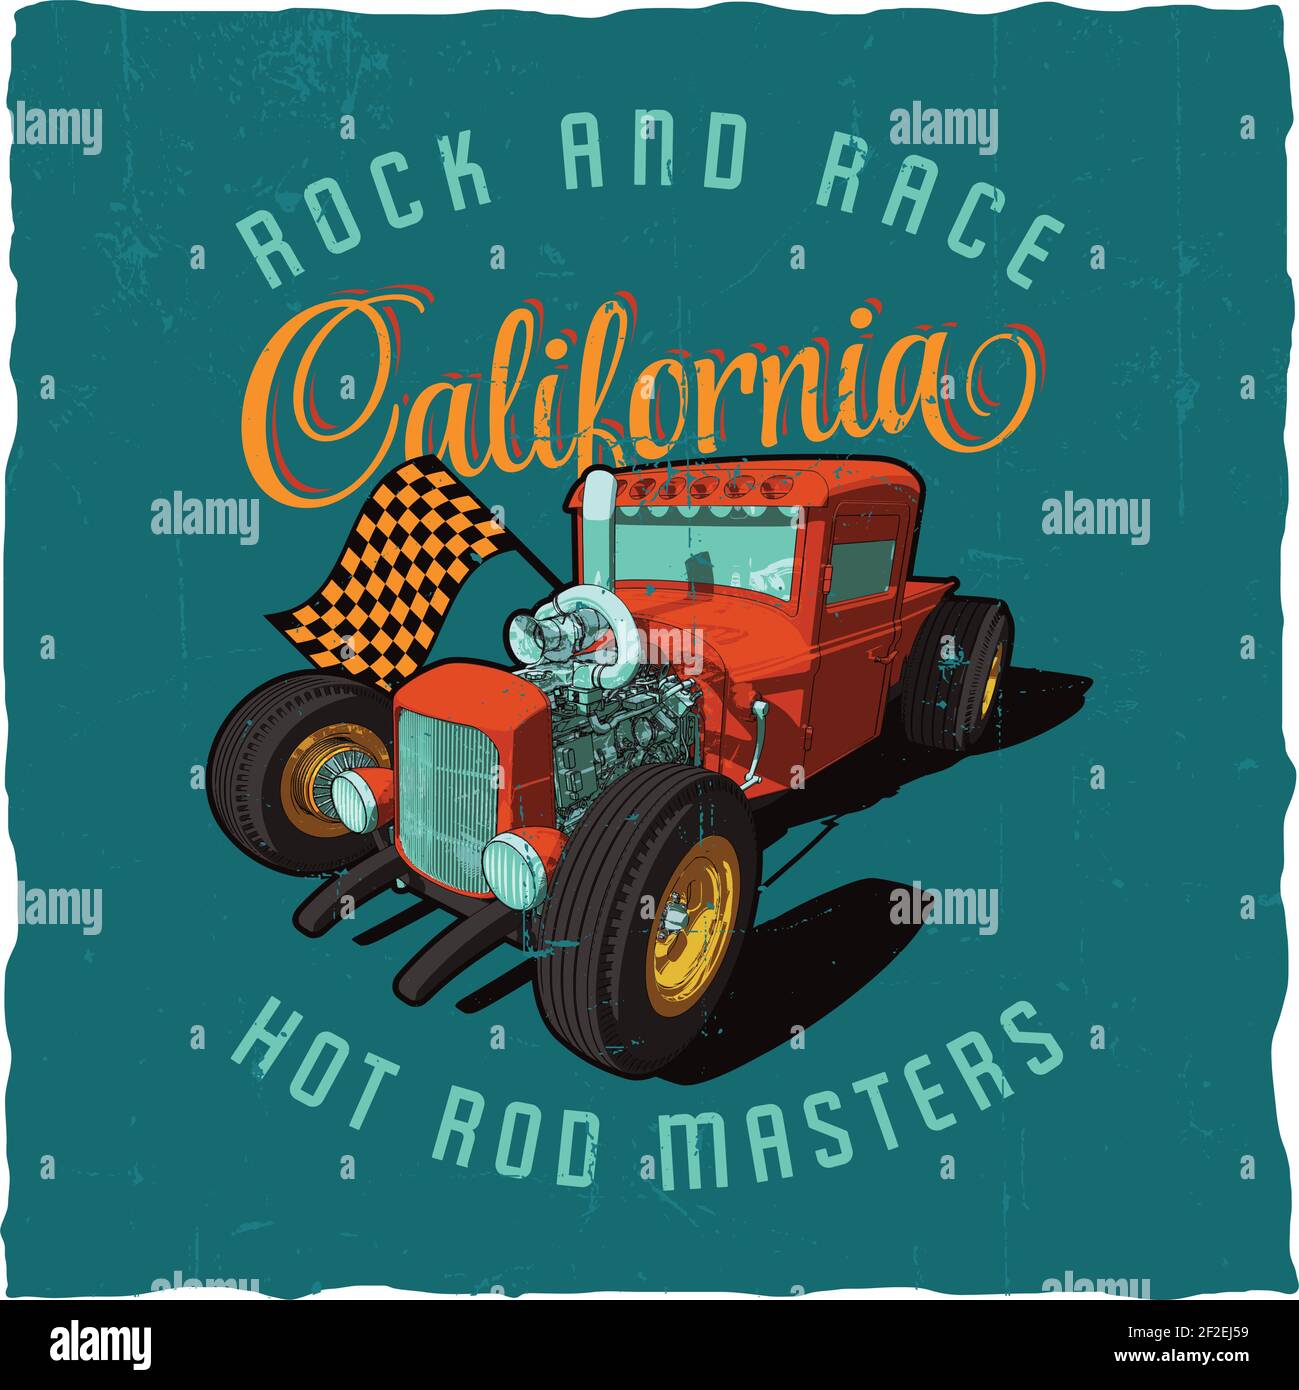 Rock and race california poster with image of car on the blue field vector illustration Stock Vector